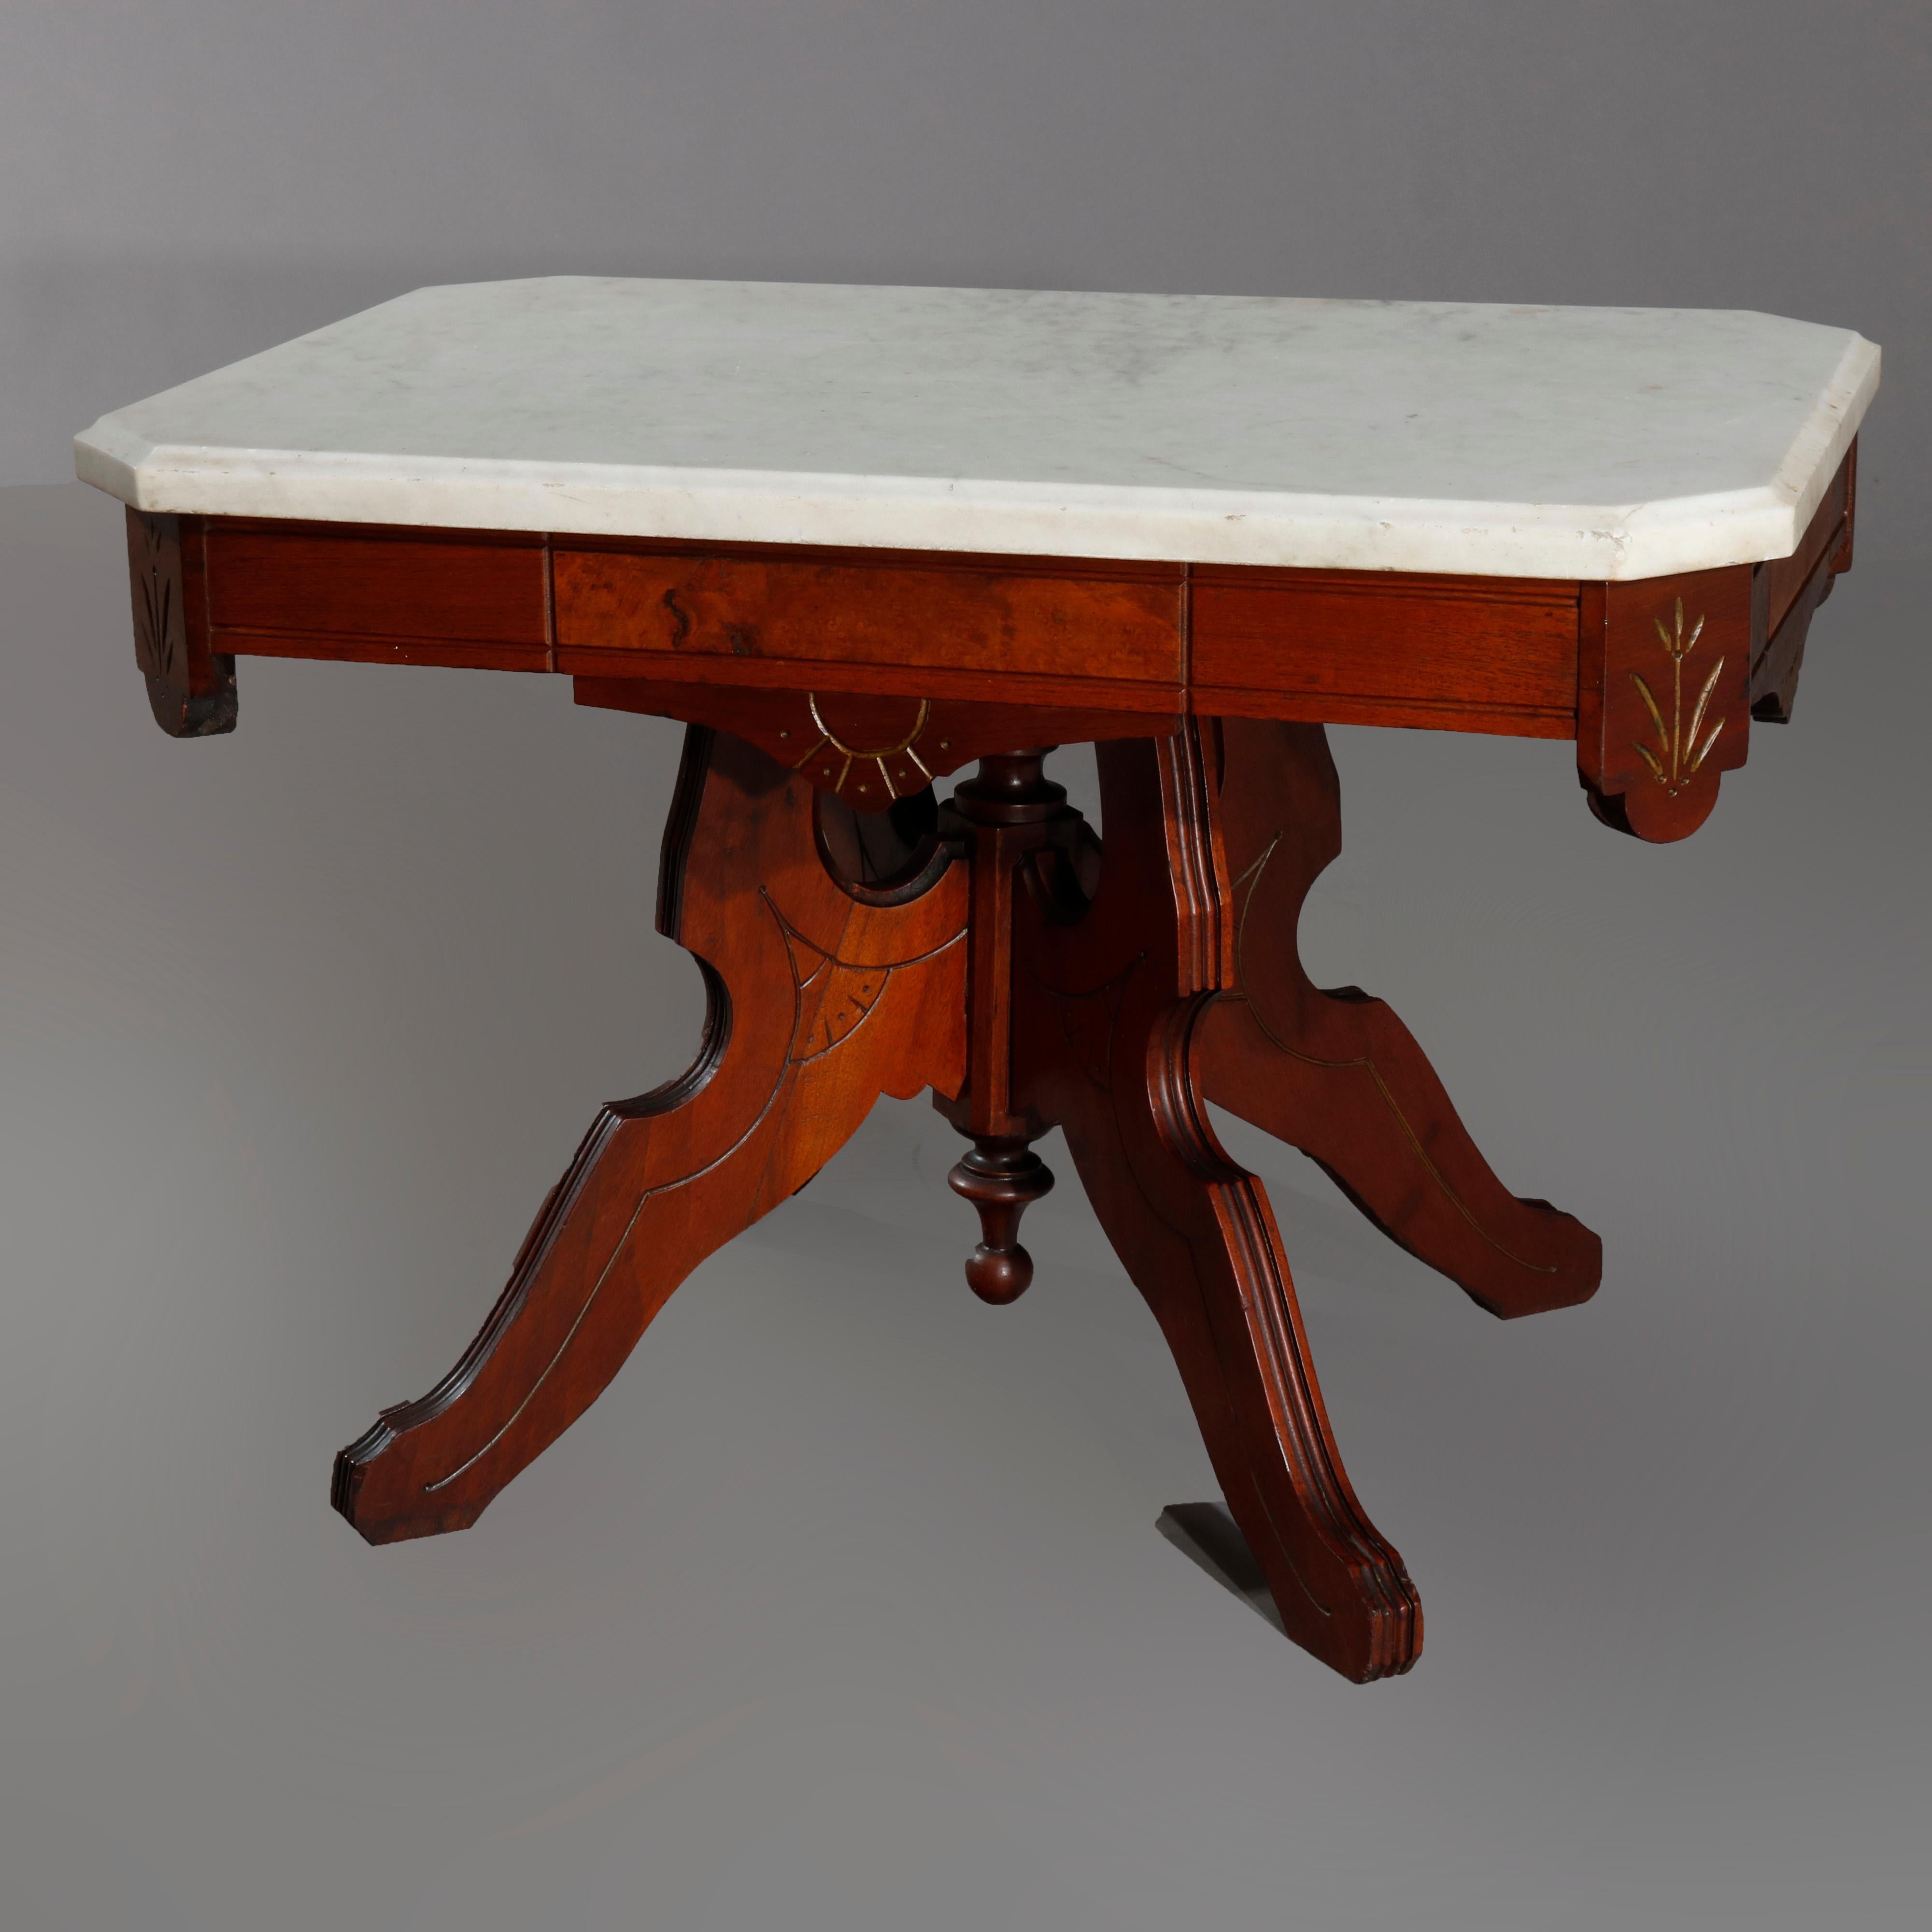 American Antique Eastlake Walnut and Burl Marble-Top Low Table, circa 1890